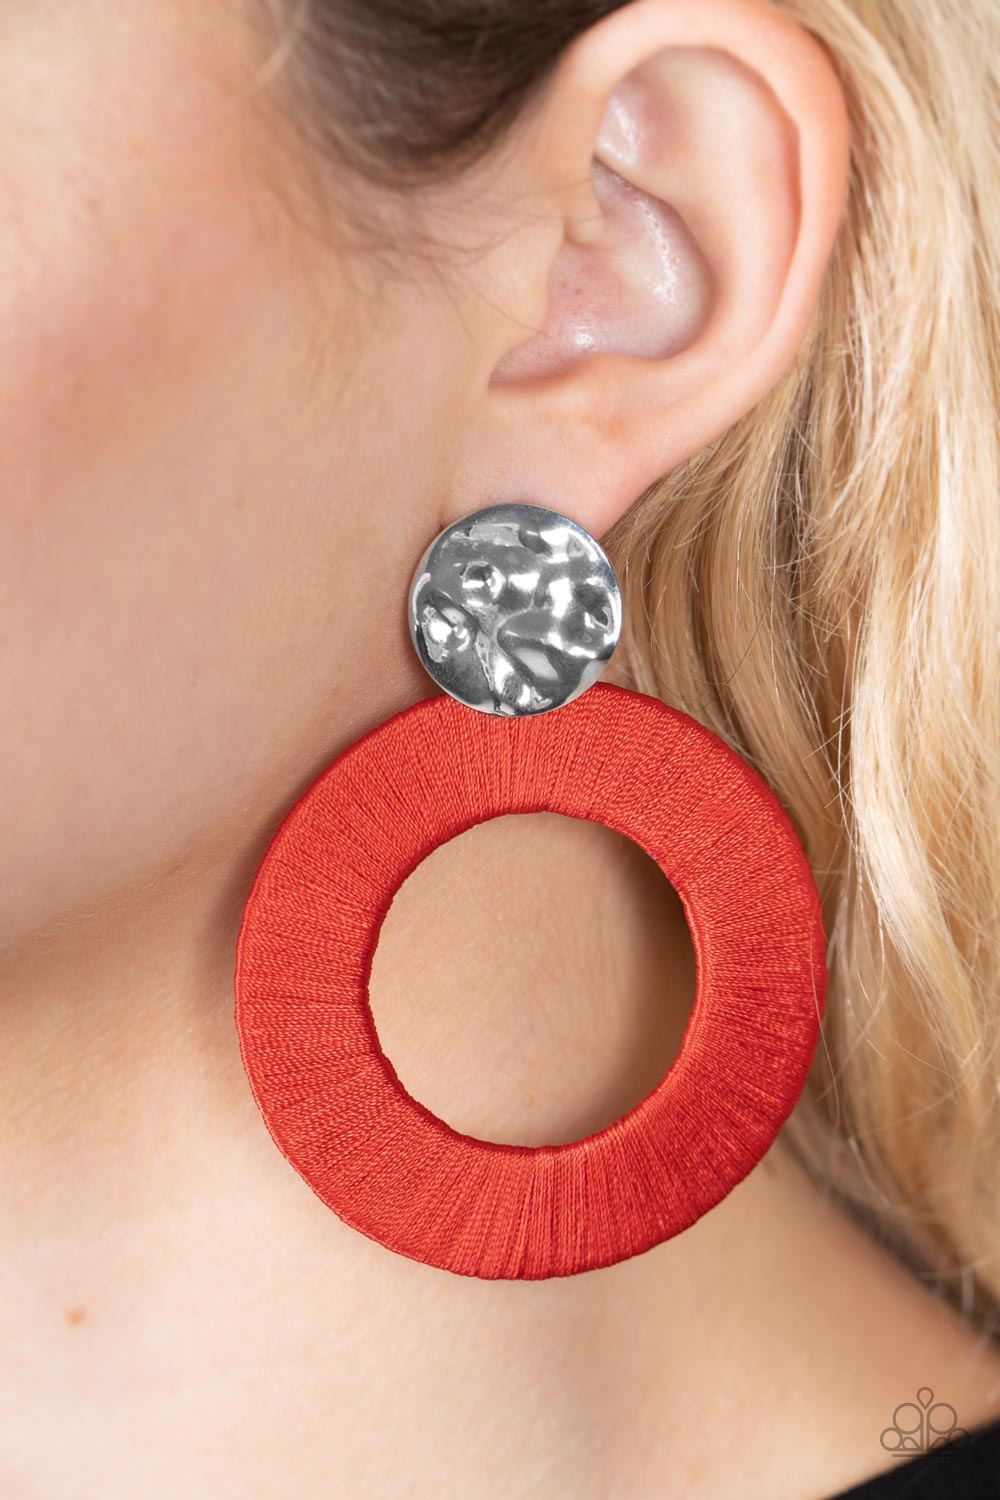 Paparazzi Accessories - Strategically Sassy #E620 - Red Earrings